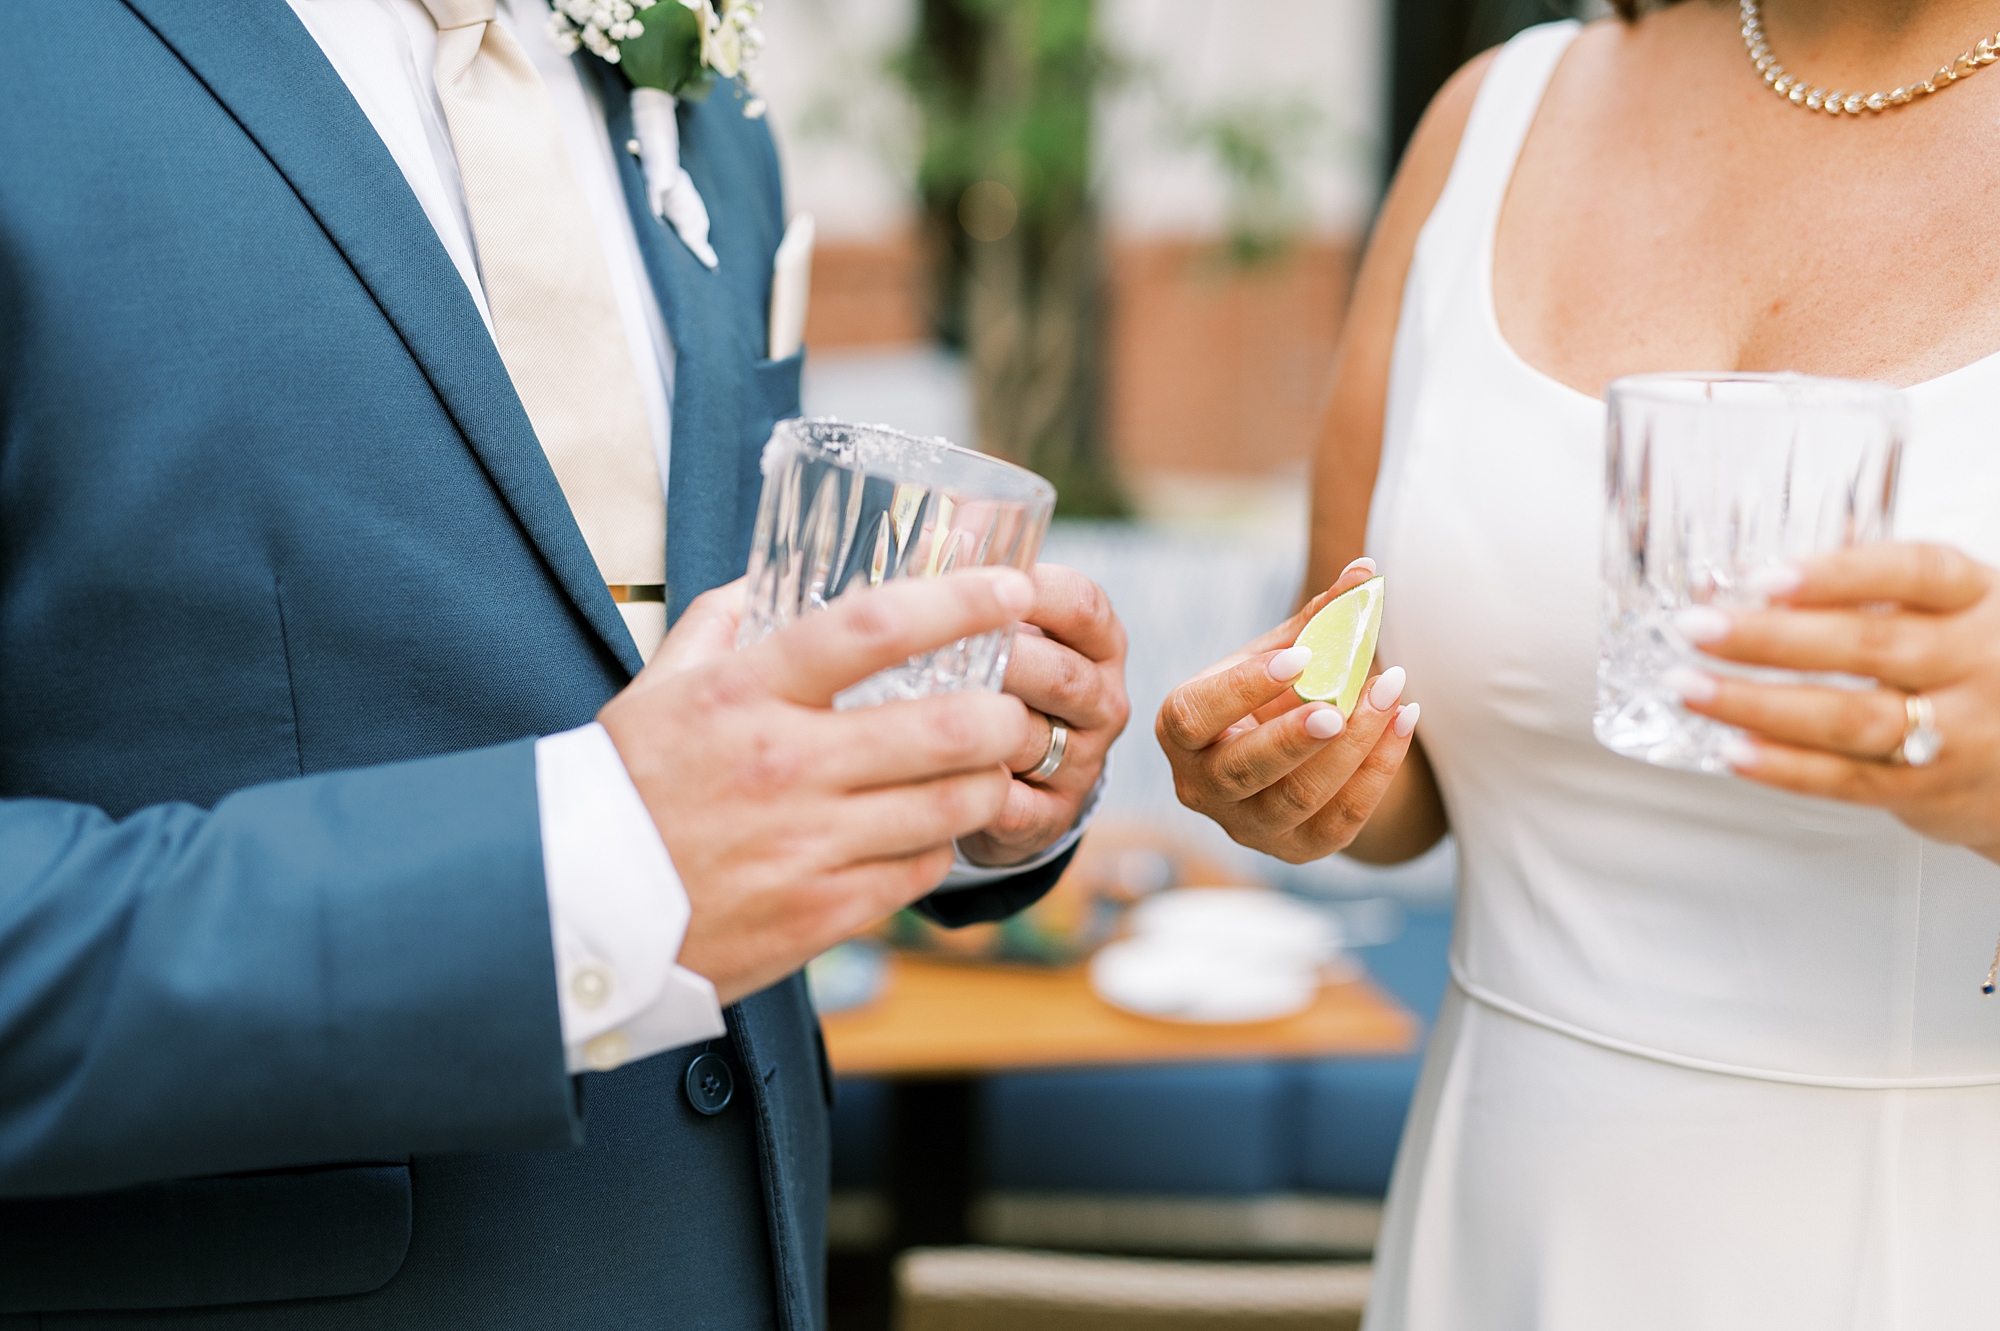 newlyweds share drink after wedding